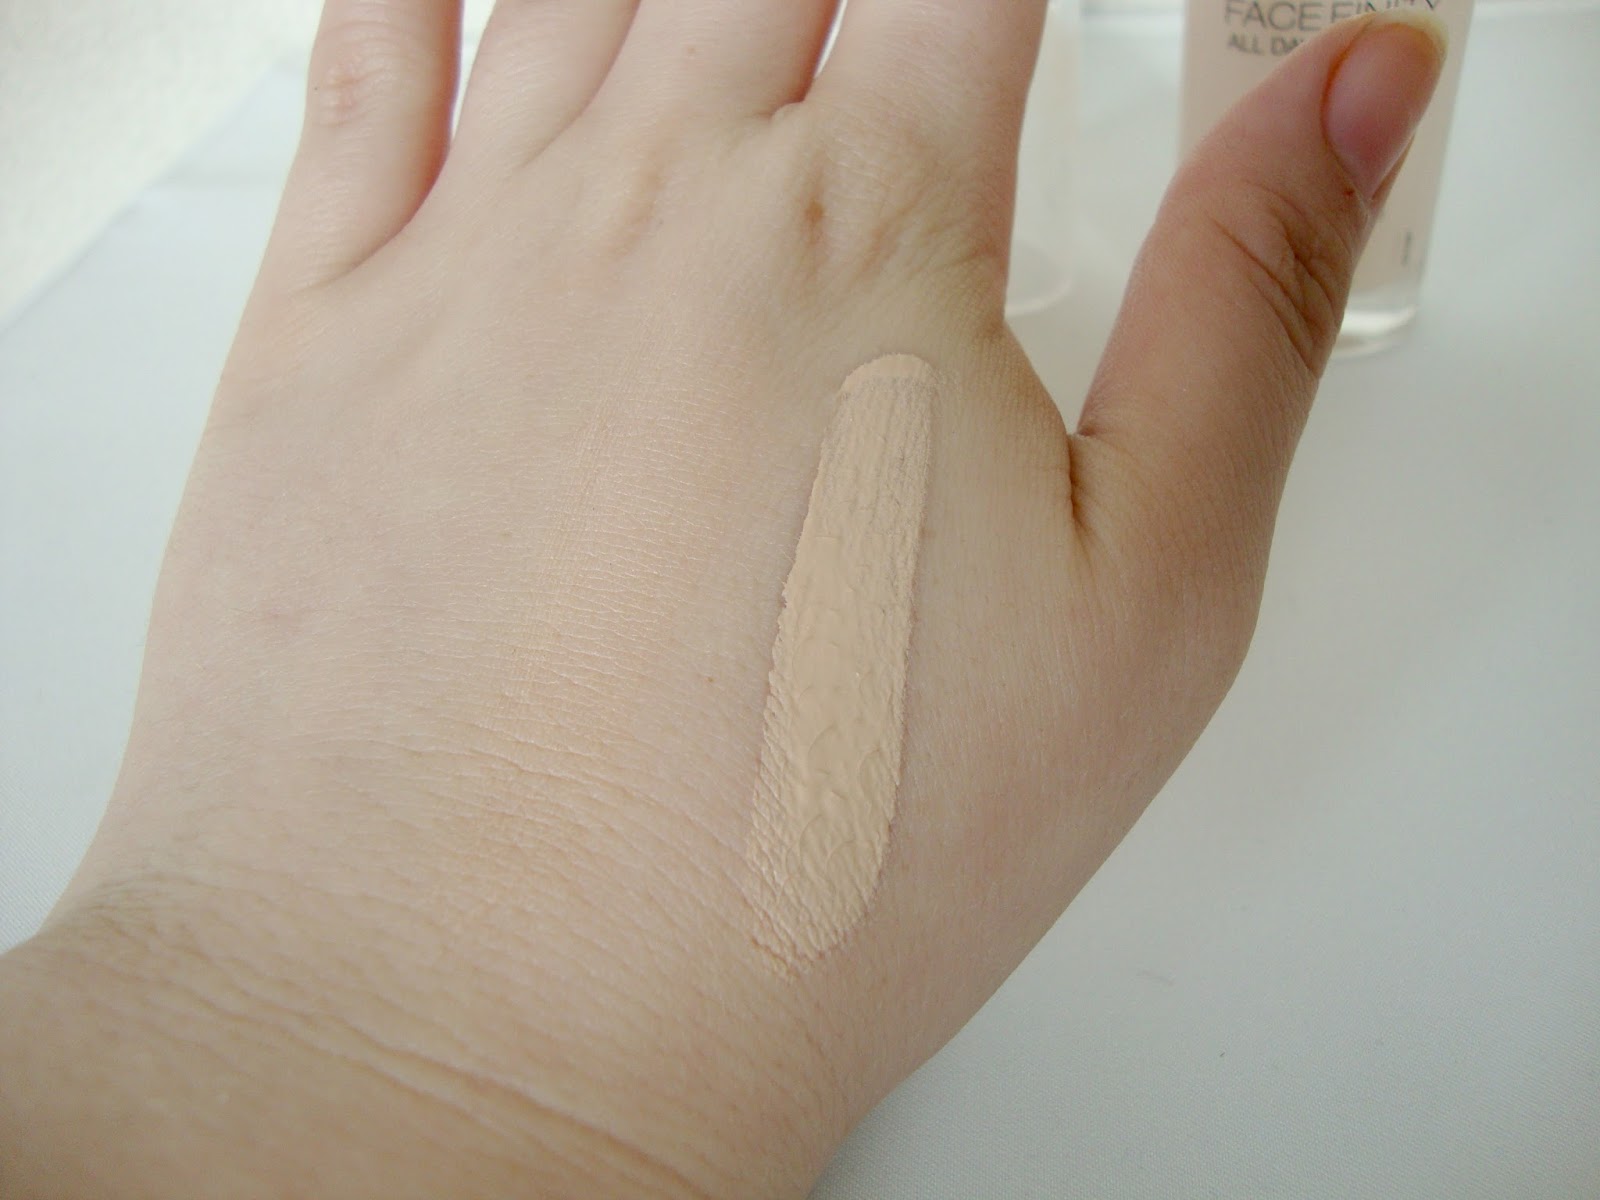 Flawless Day Foundation Maxfactor Alice All Anne | Facefinity